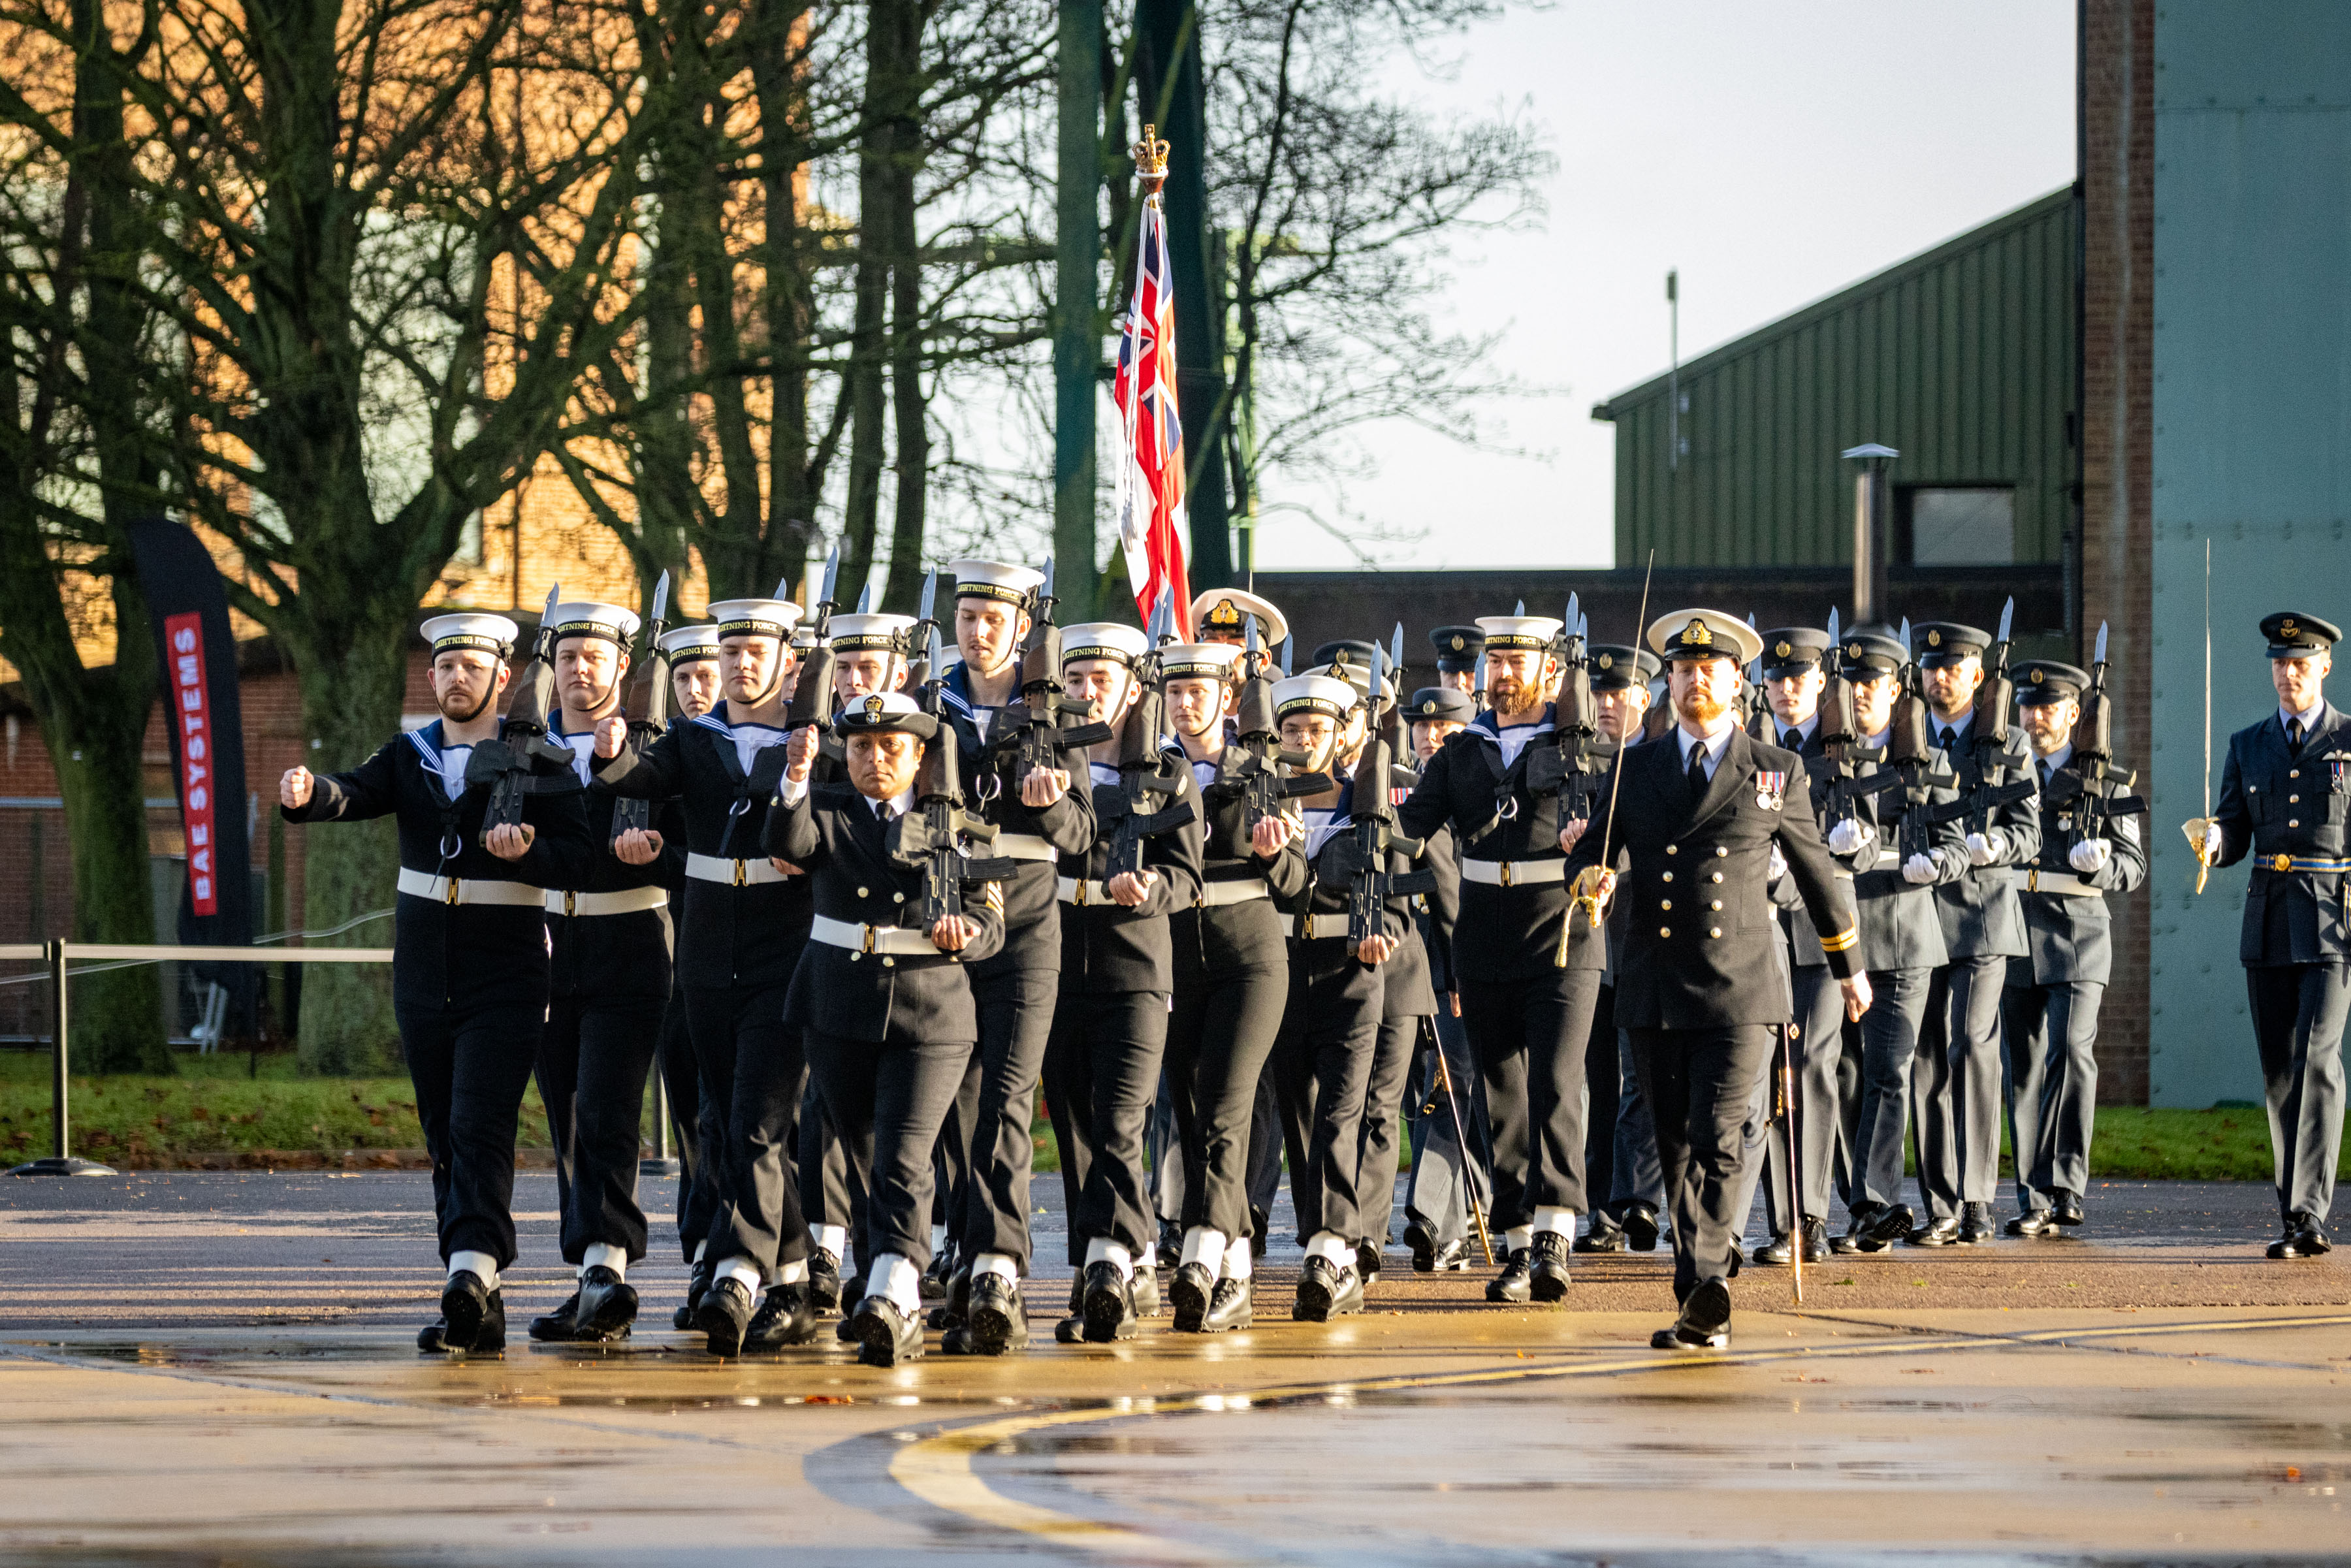 Royal Navy and RAF personnel marching on parade.